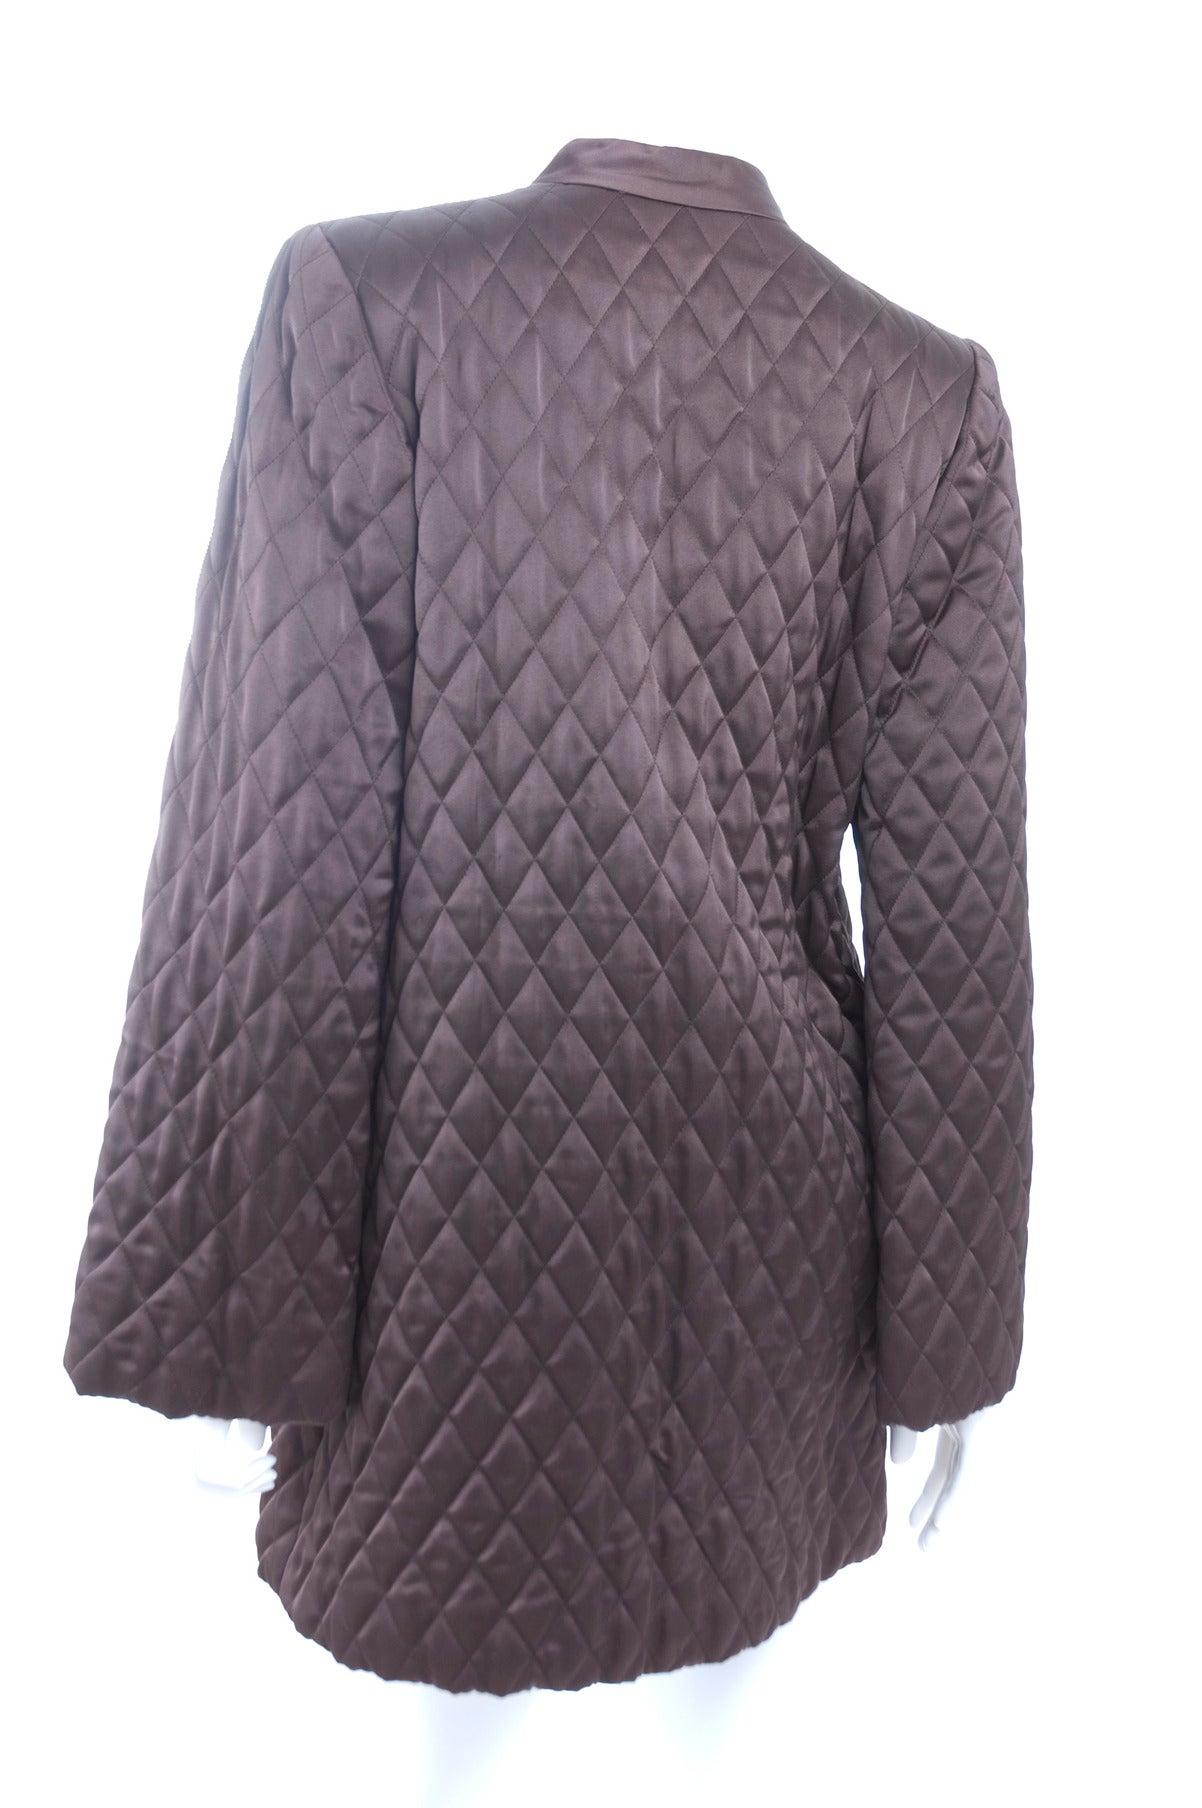 1977 Yves Saint Laurent Quilted Satin Jacket For Sale 1